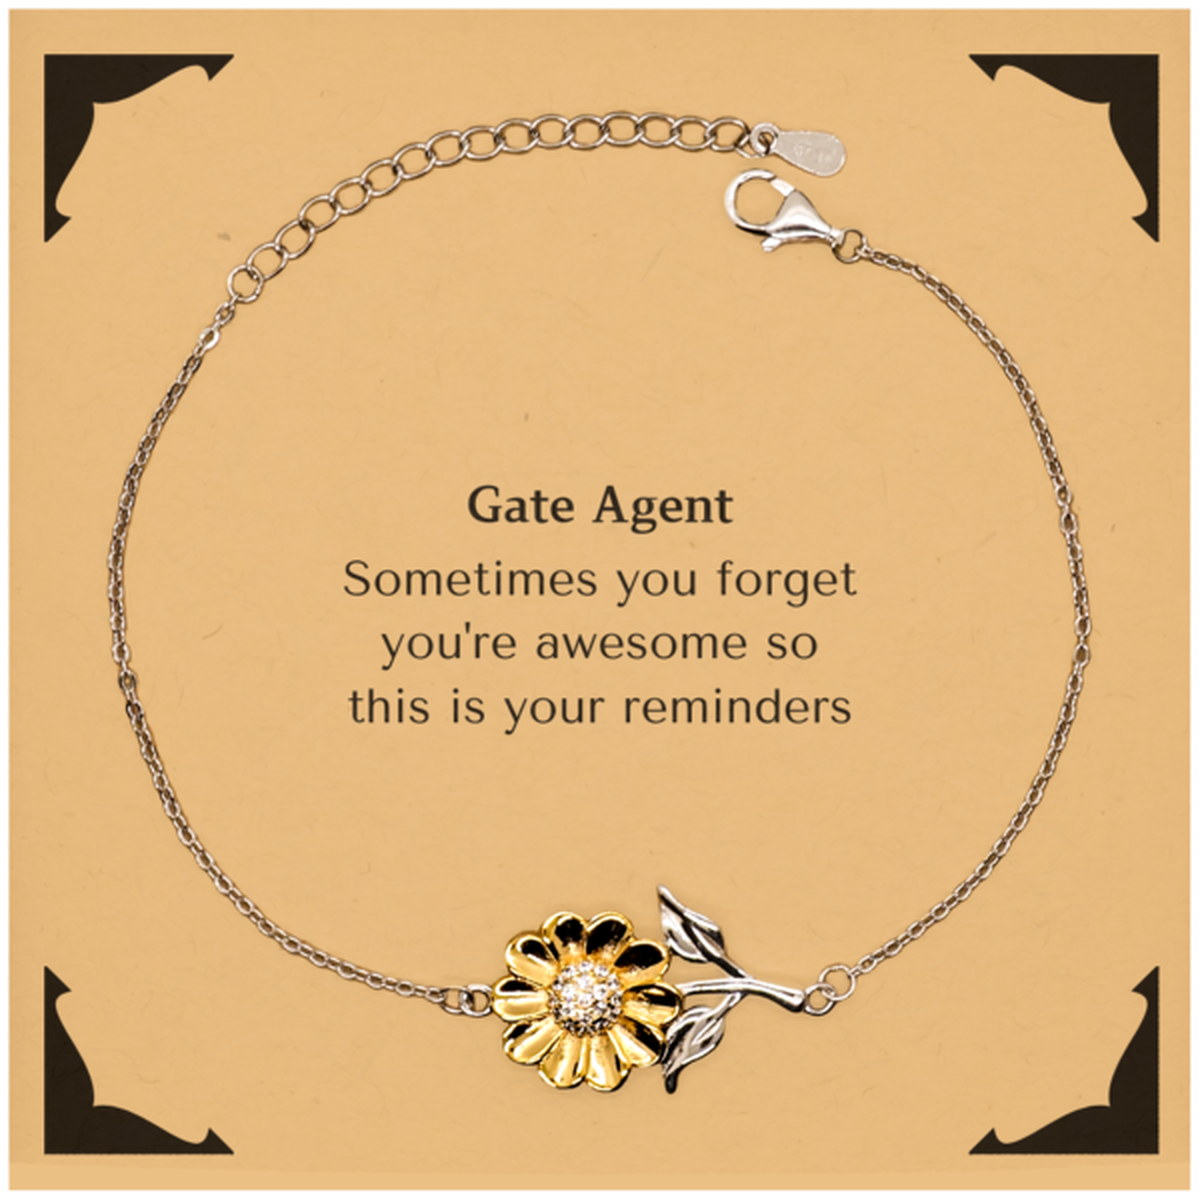 Sentimental Gate Agent Sunflower Bracelet, Gate Agent Sometimes you forget you're awesome so this is your reminders, Graduation Christmas Birthday Gifts for Gate Agent, Men, Women, Coworkers